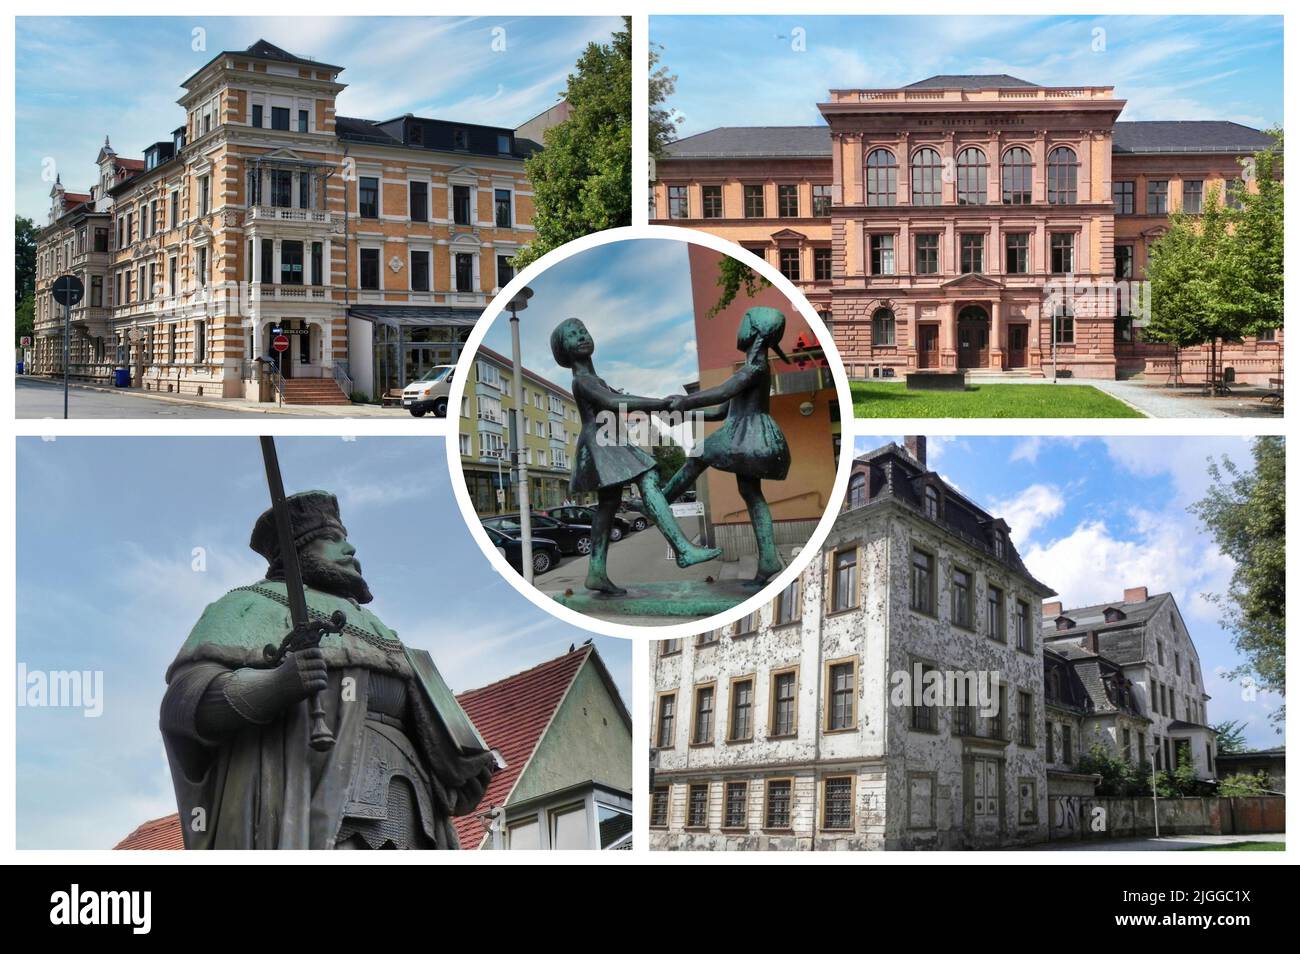 Gera is a city in Thuringia, Germany. It is, after the capital Erfurt and Jena, the third largest city by population in the Land. Stock Photo